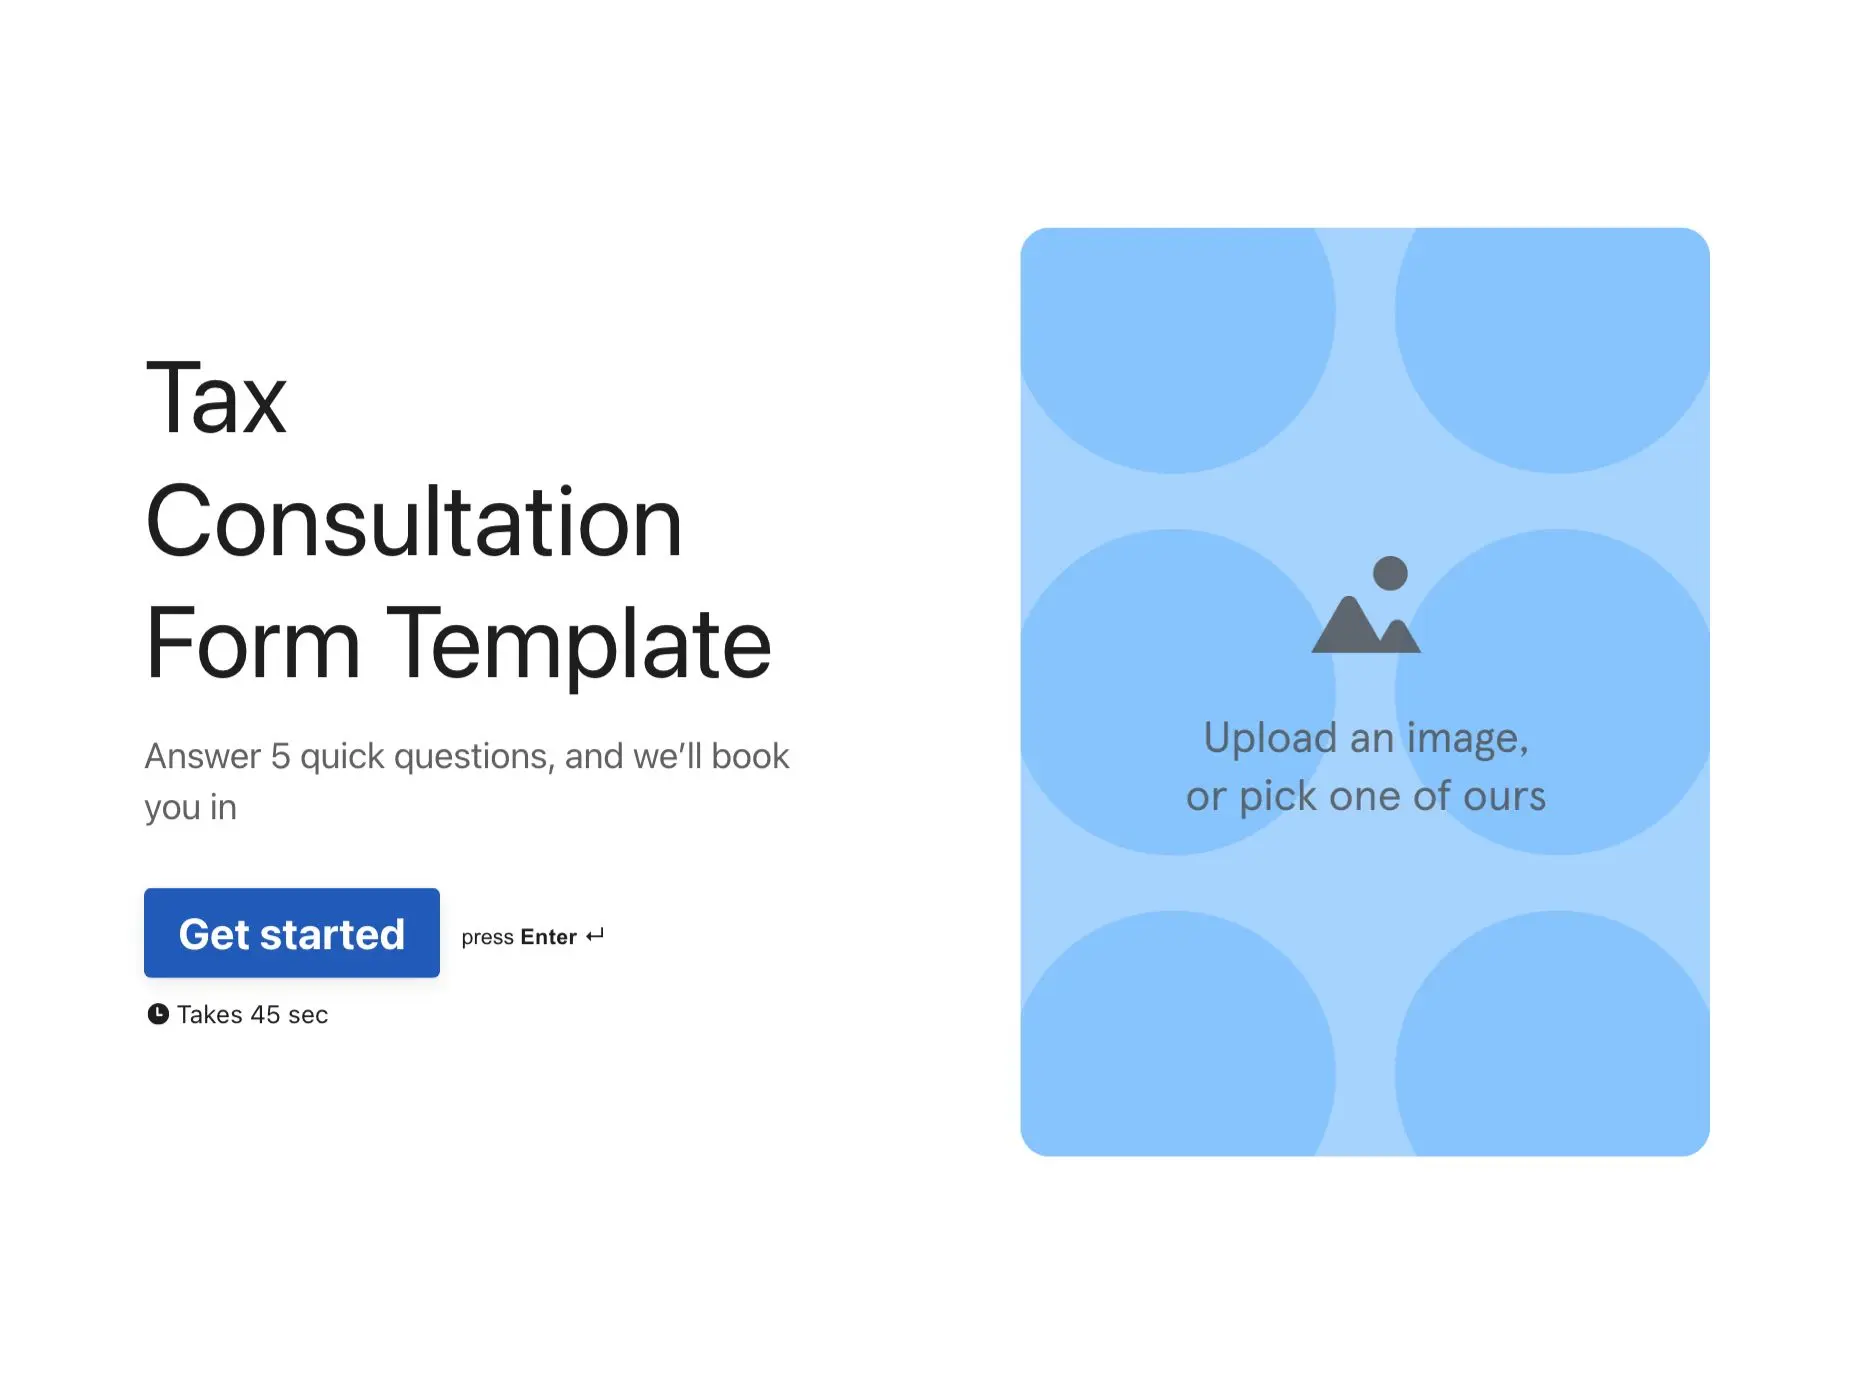 Tax Consultation Form Template Hero